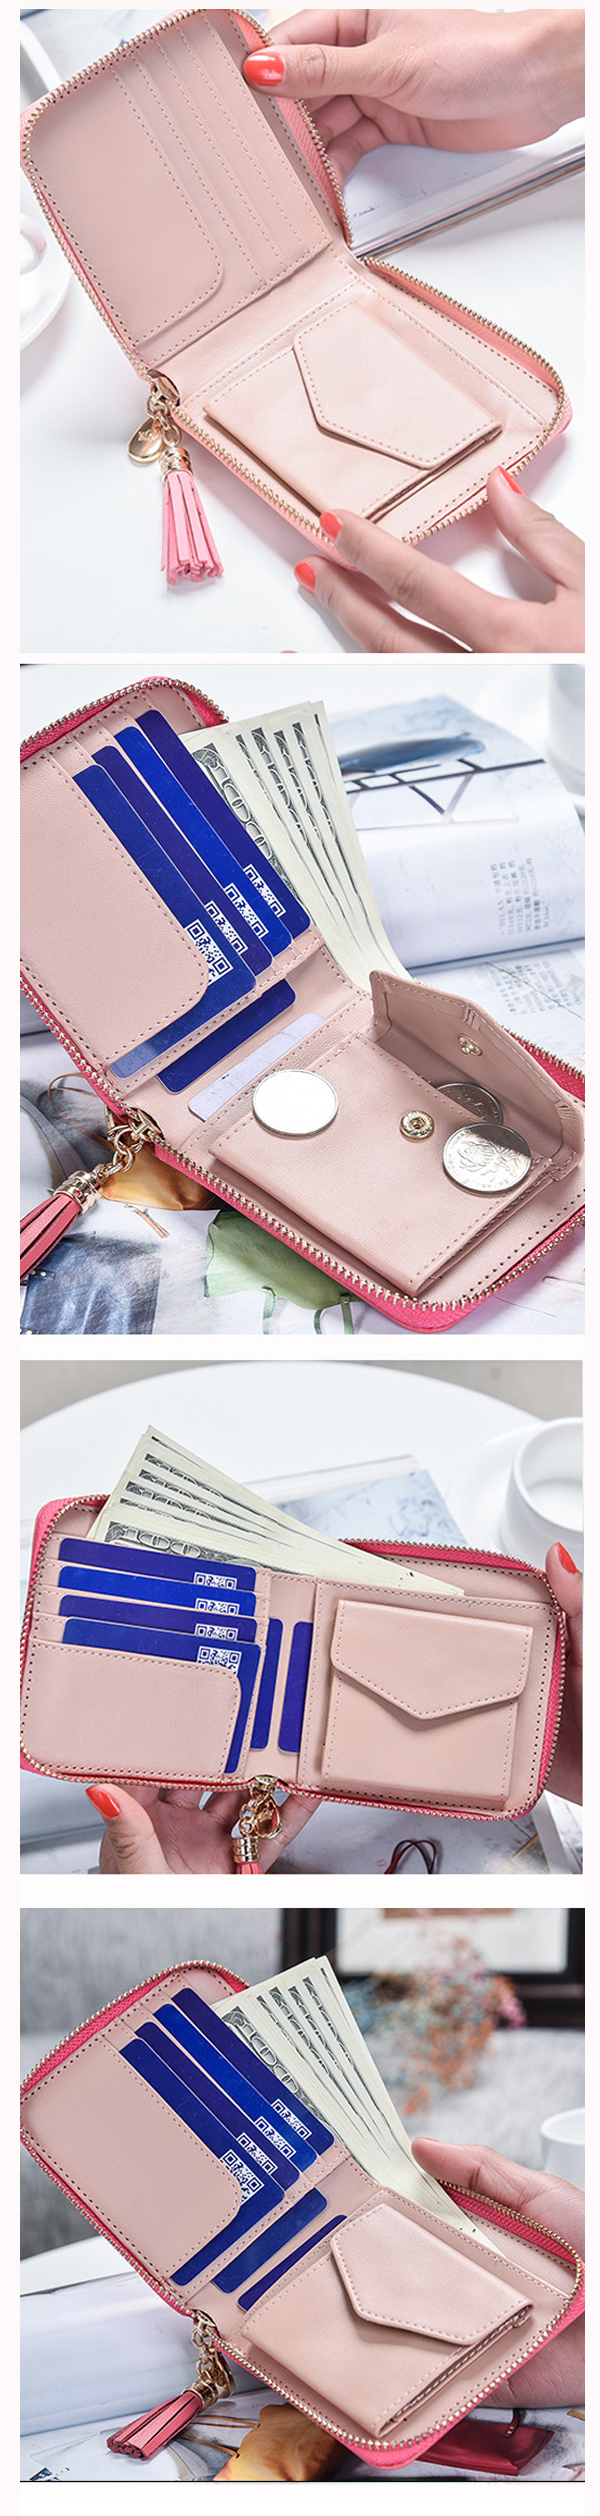 6-Card-Slots-Women-Pu-Leather-Wallet-Coins-Bag-Credit-Card-Holders-1138006